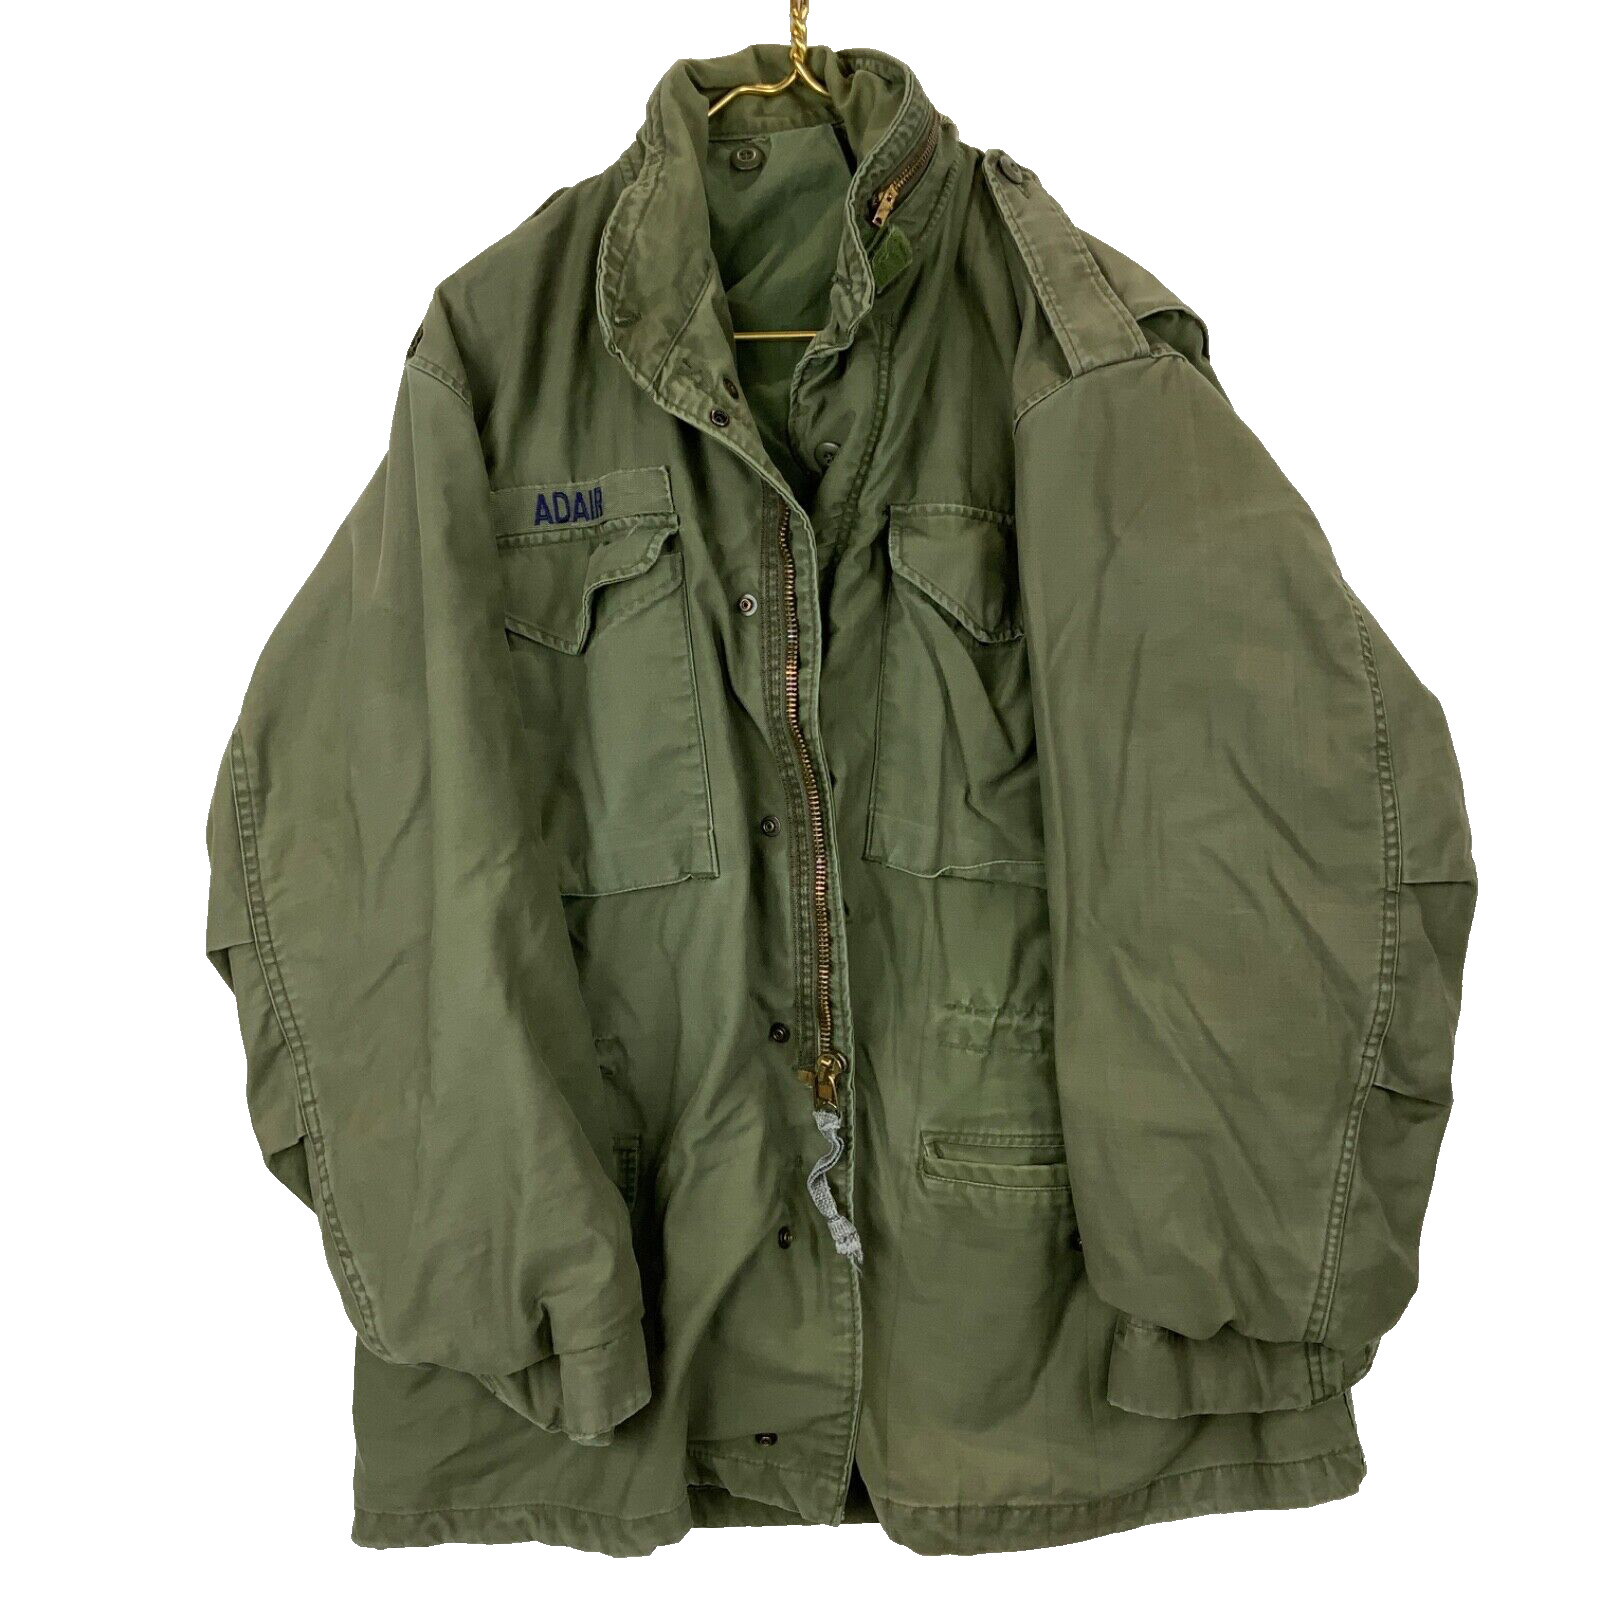 Vintage Us Military Cold Weather Jacket Size Large Green 1982